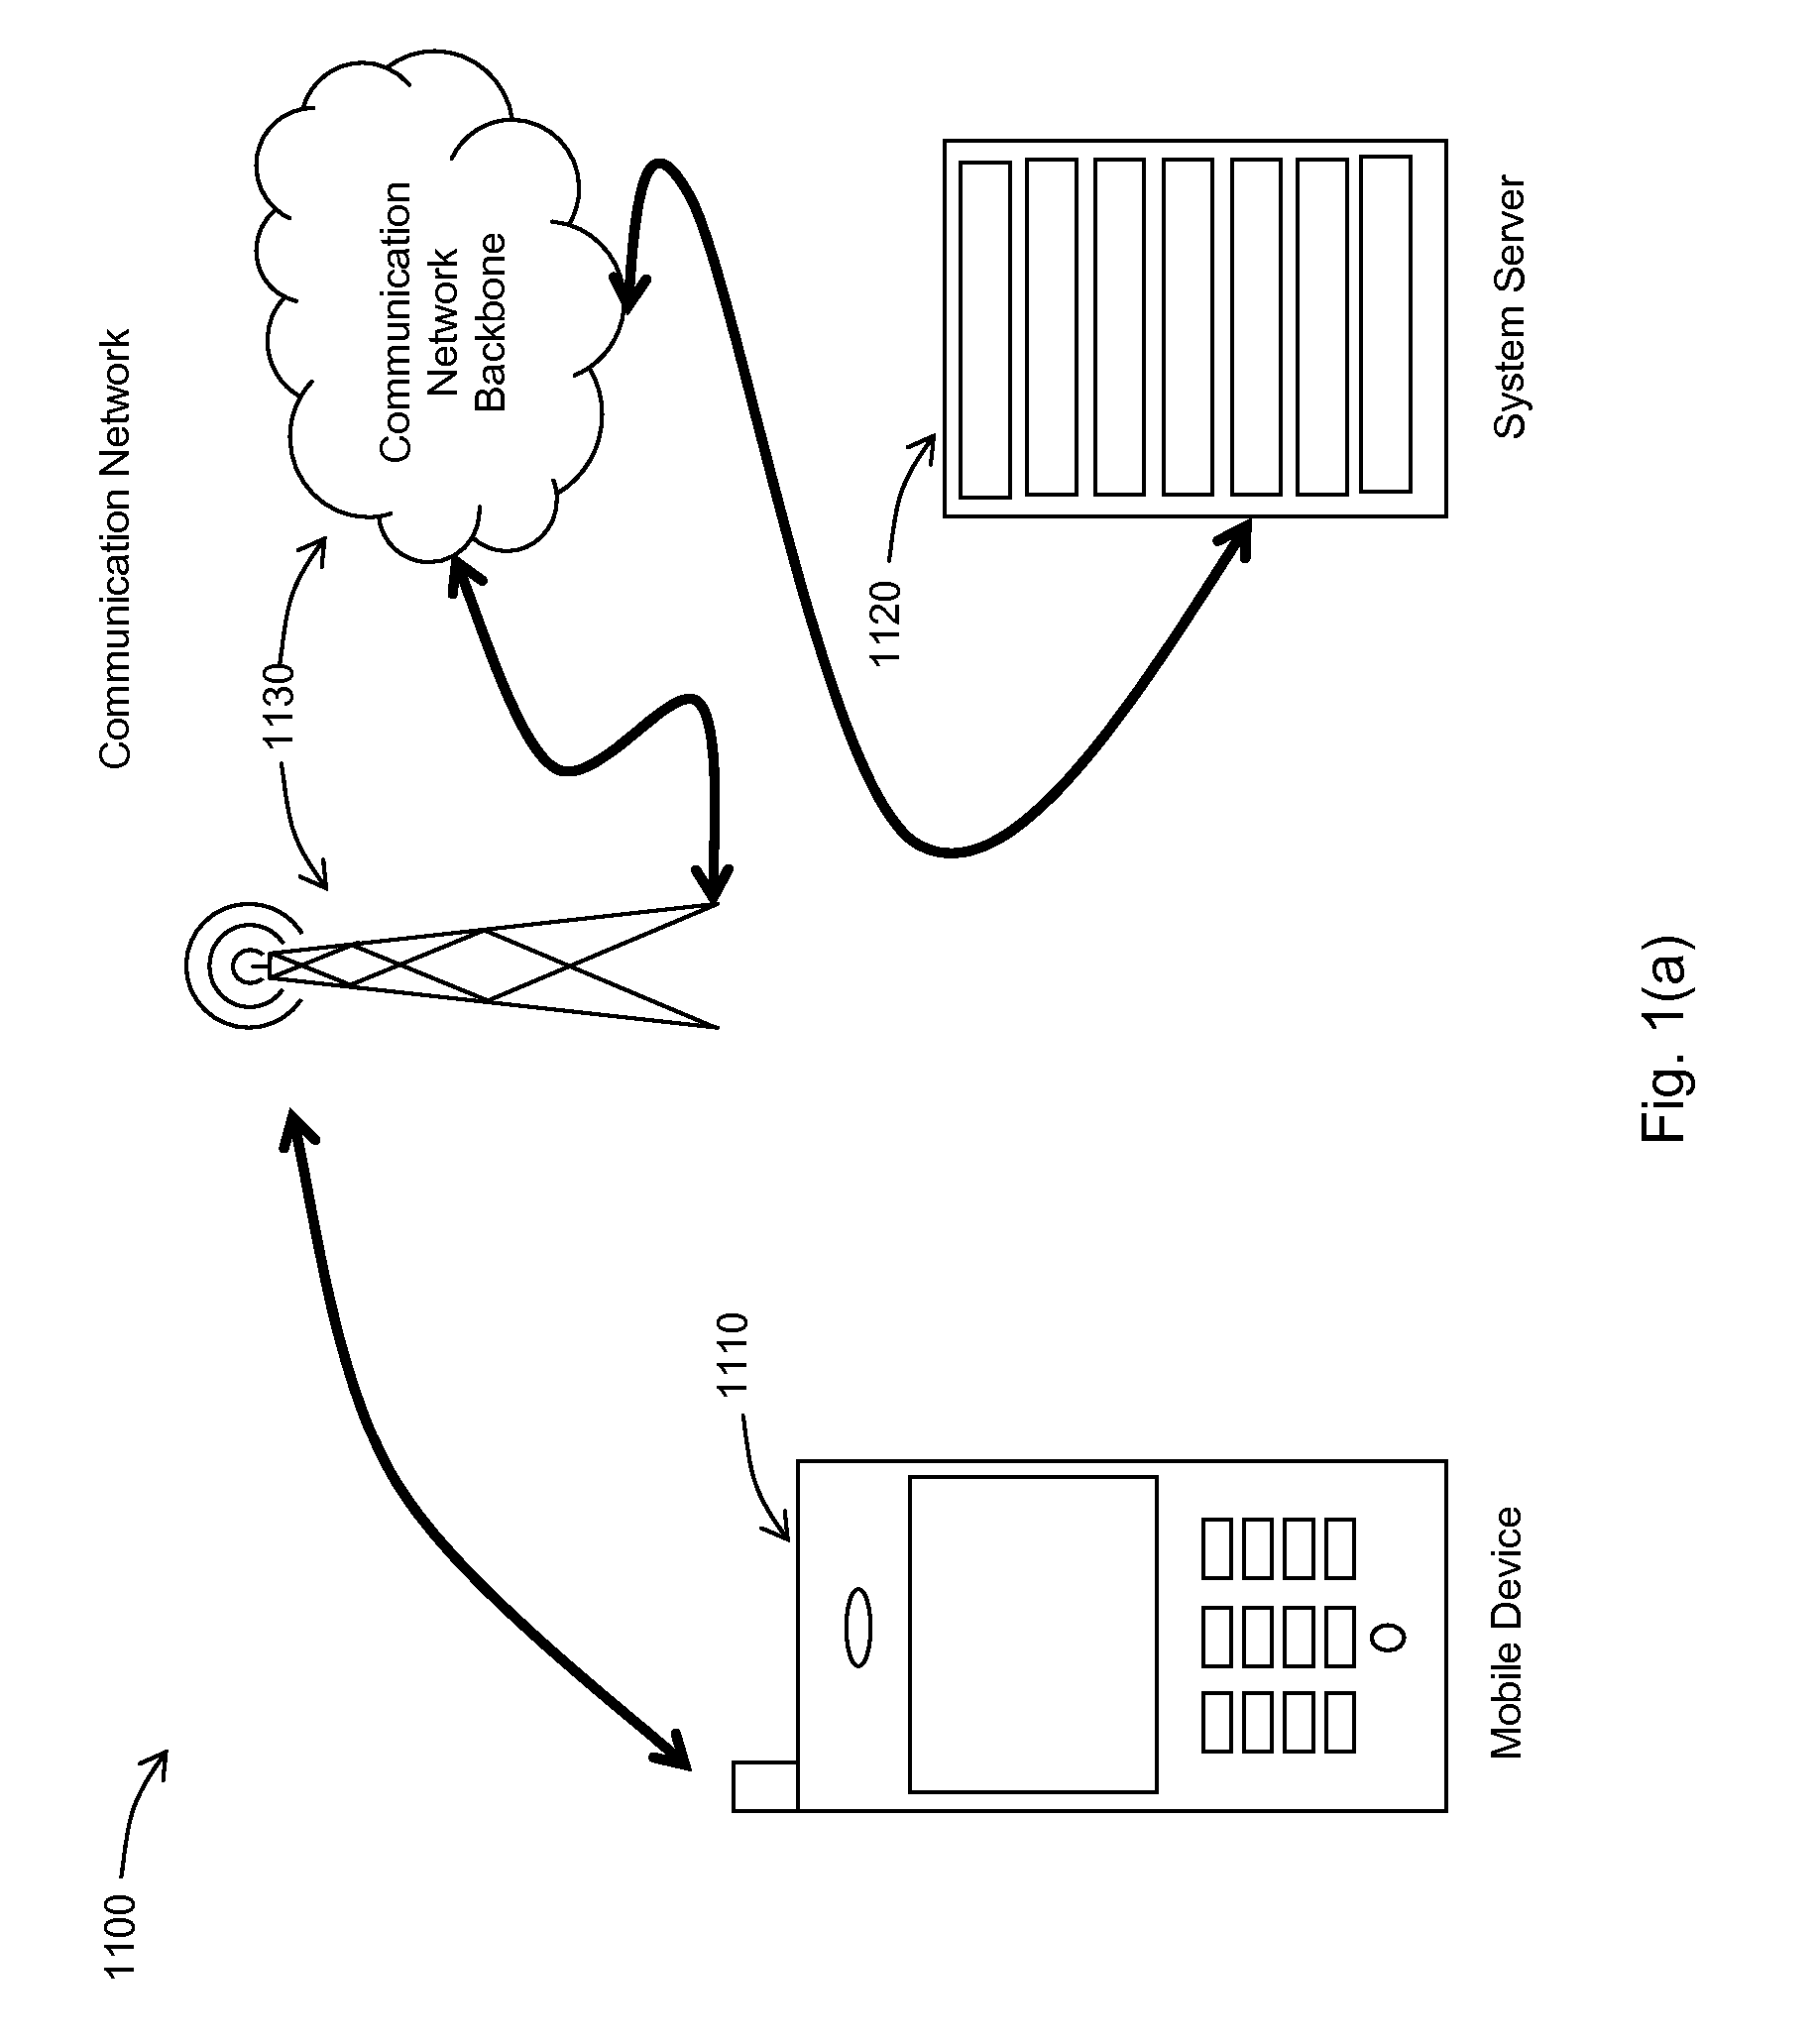 System and Method for Providing Digital Content on Mobile Devices